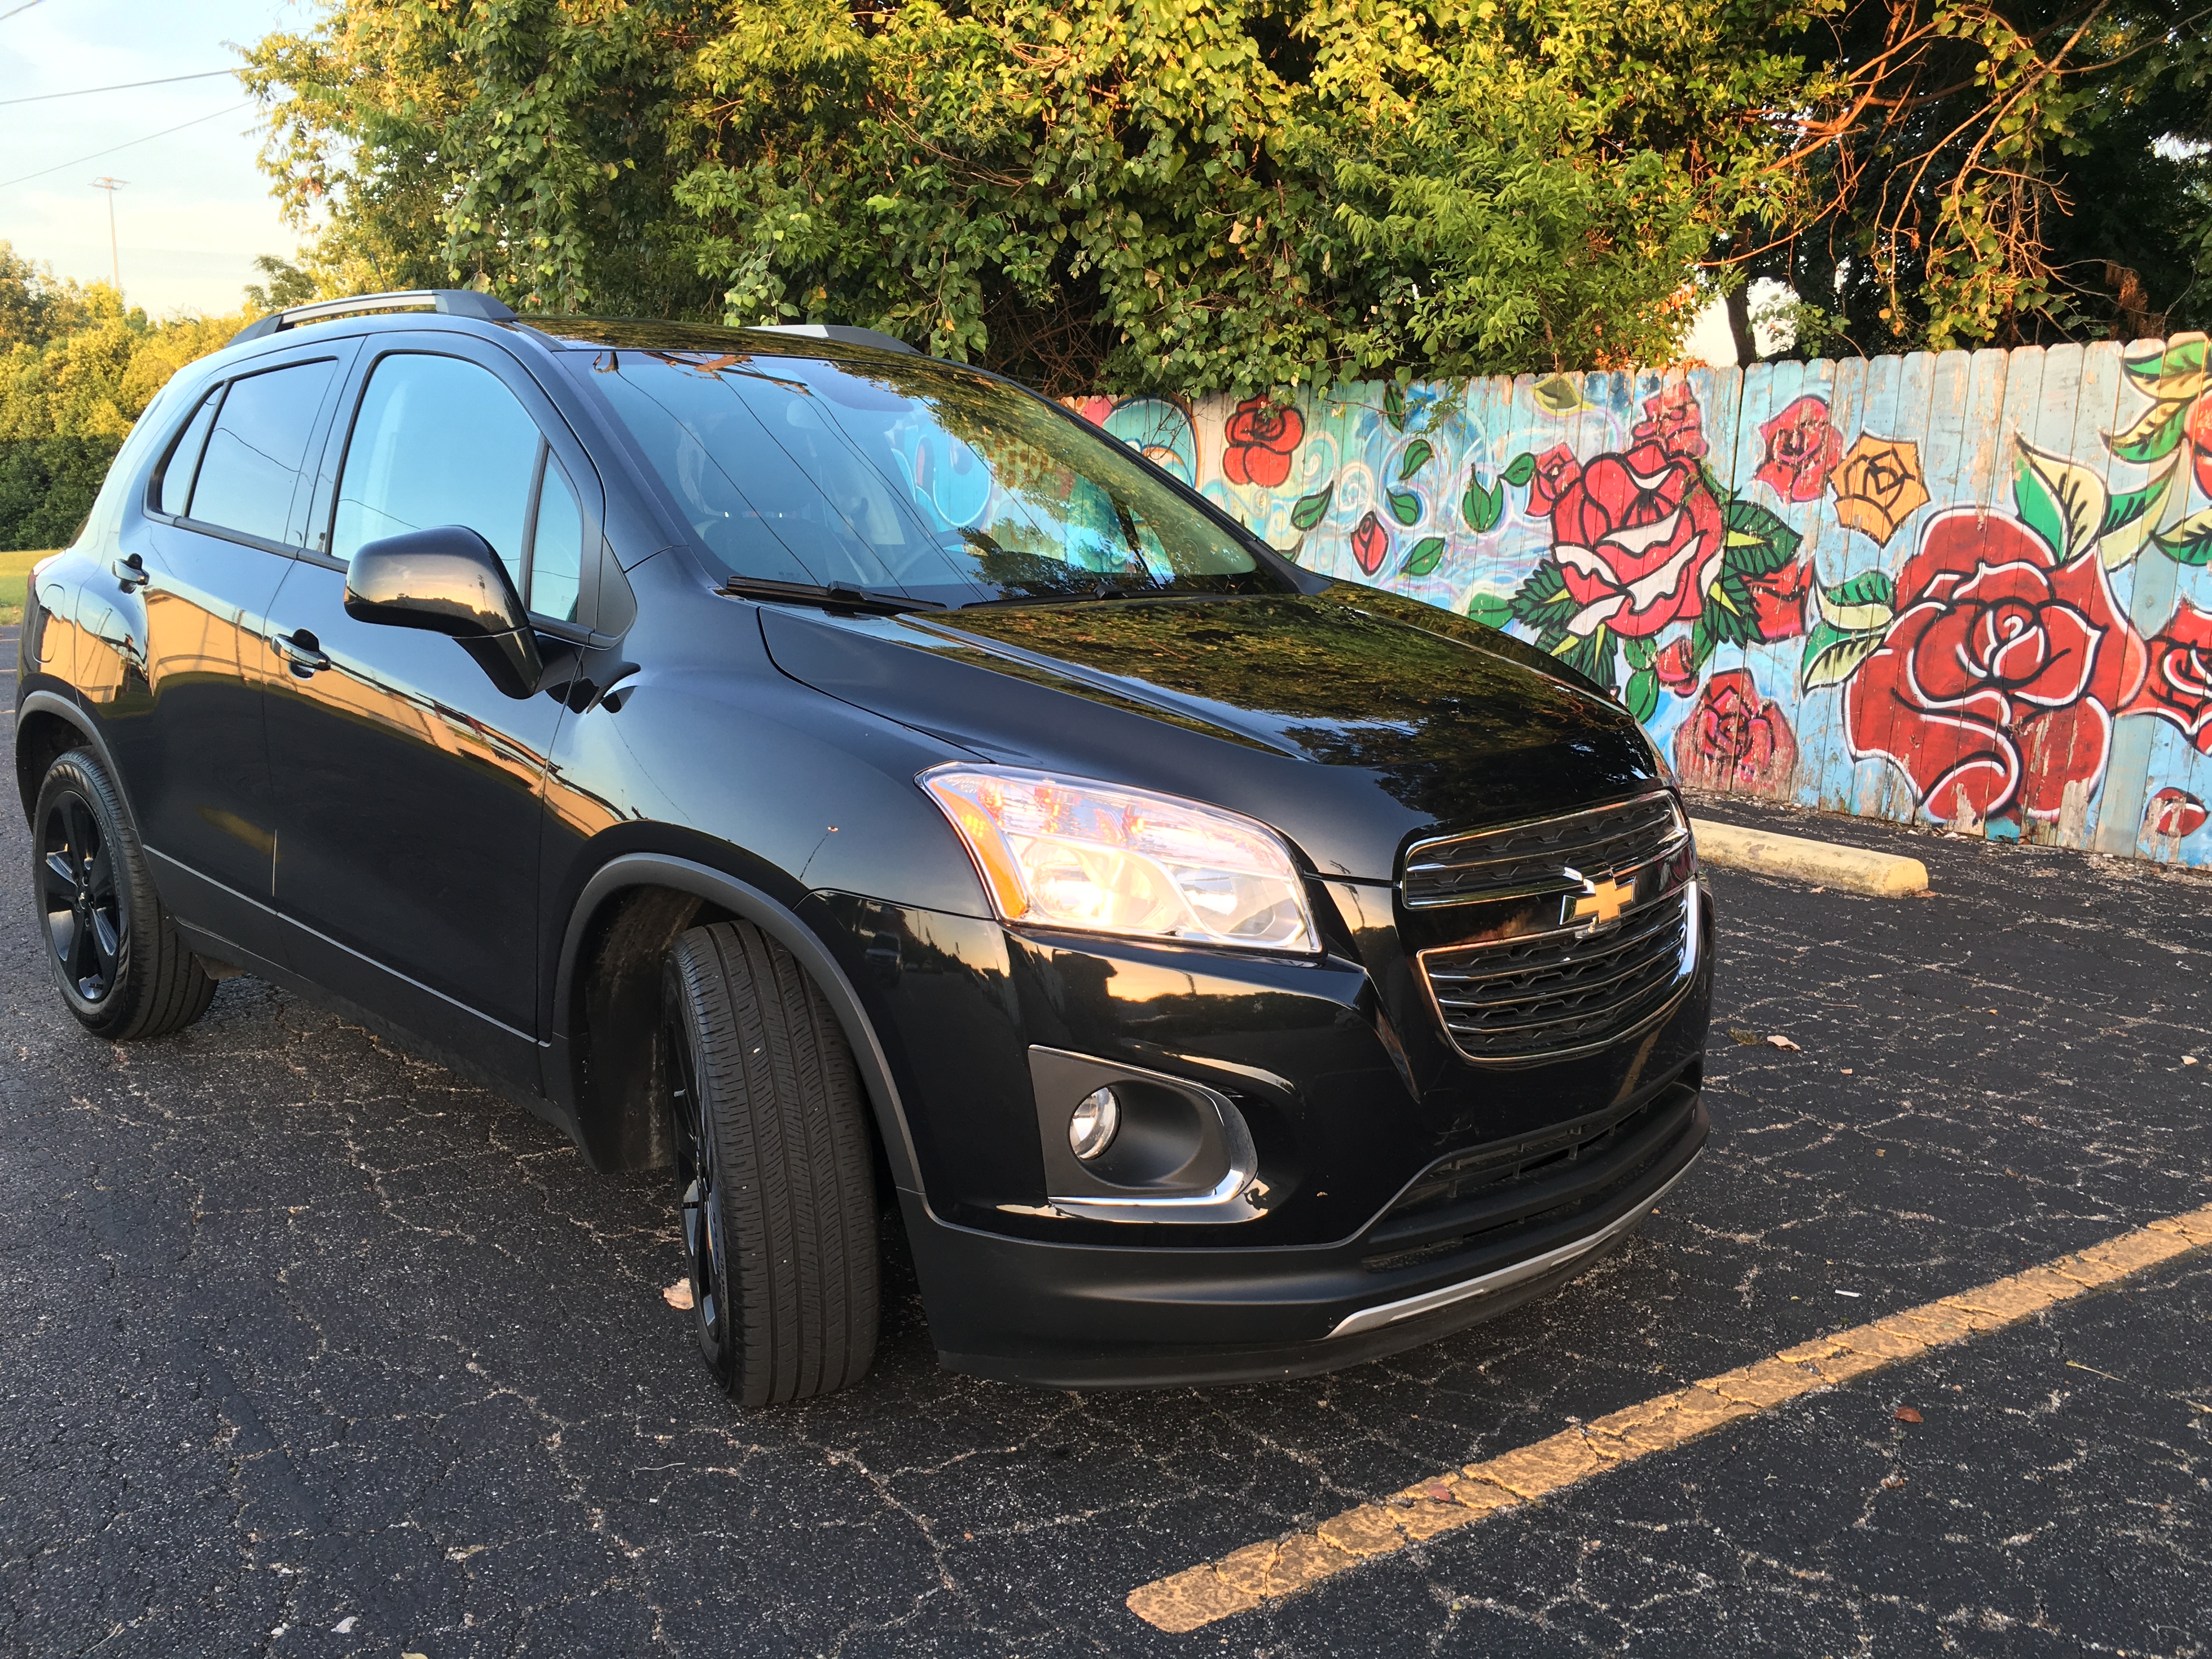 Chevrolet Trax (Tracker) exterior restyling